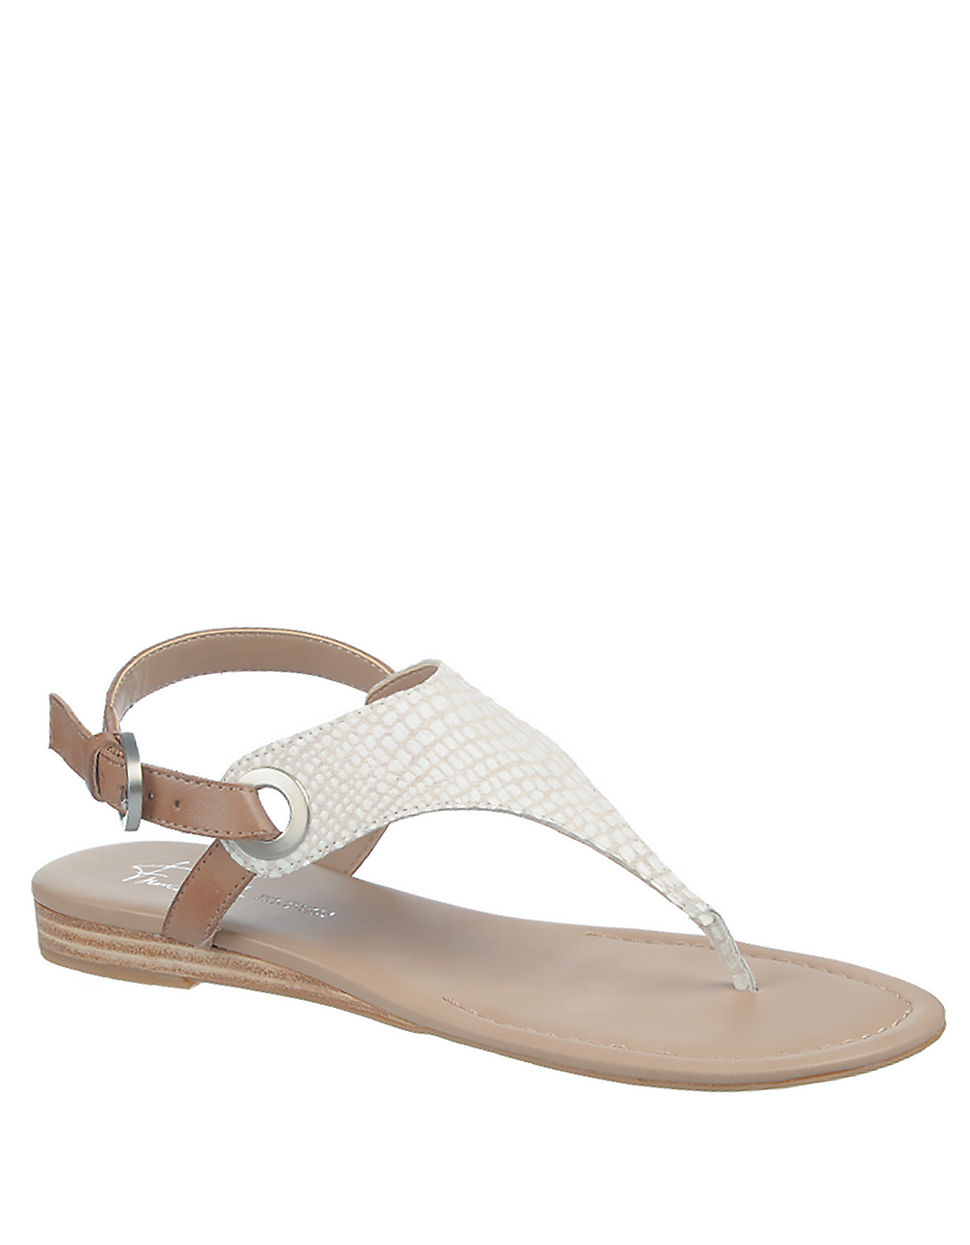 Lyst - Franco Sarto Grip Embossed T-Strap Sandals in White